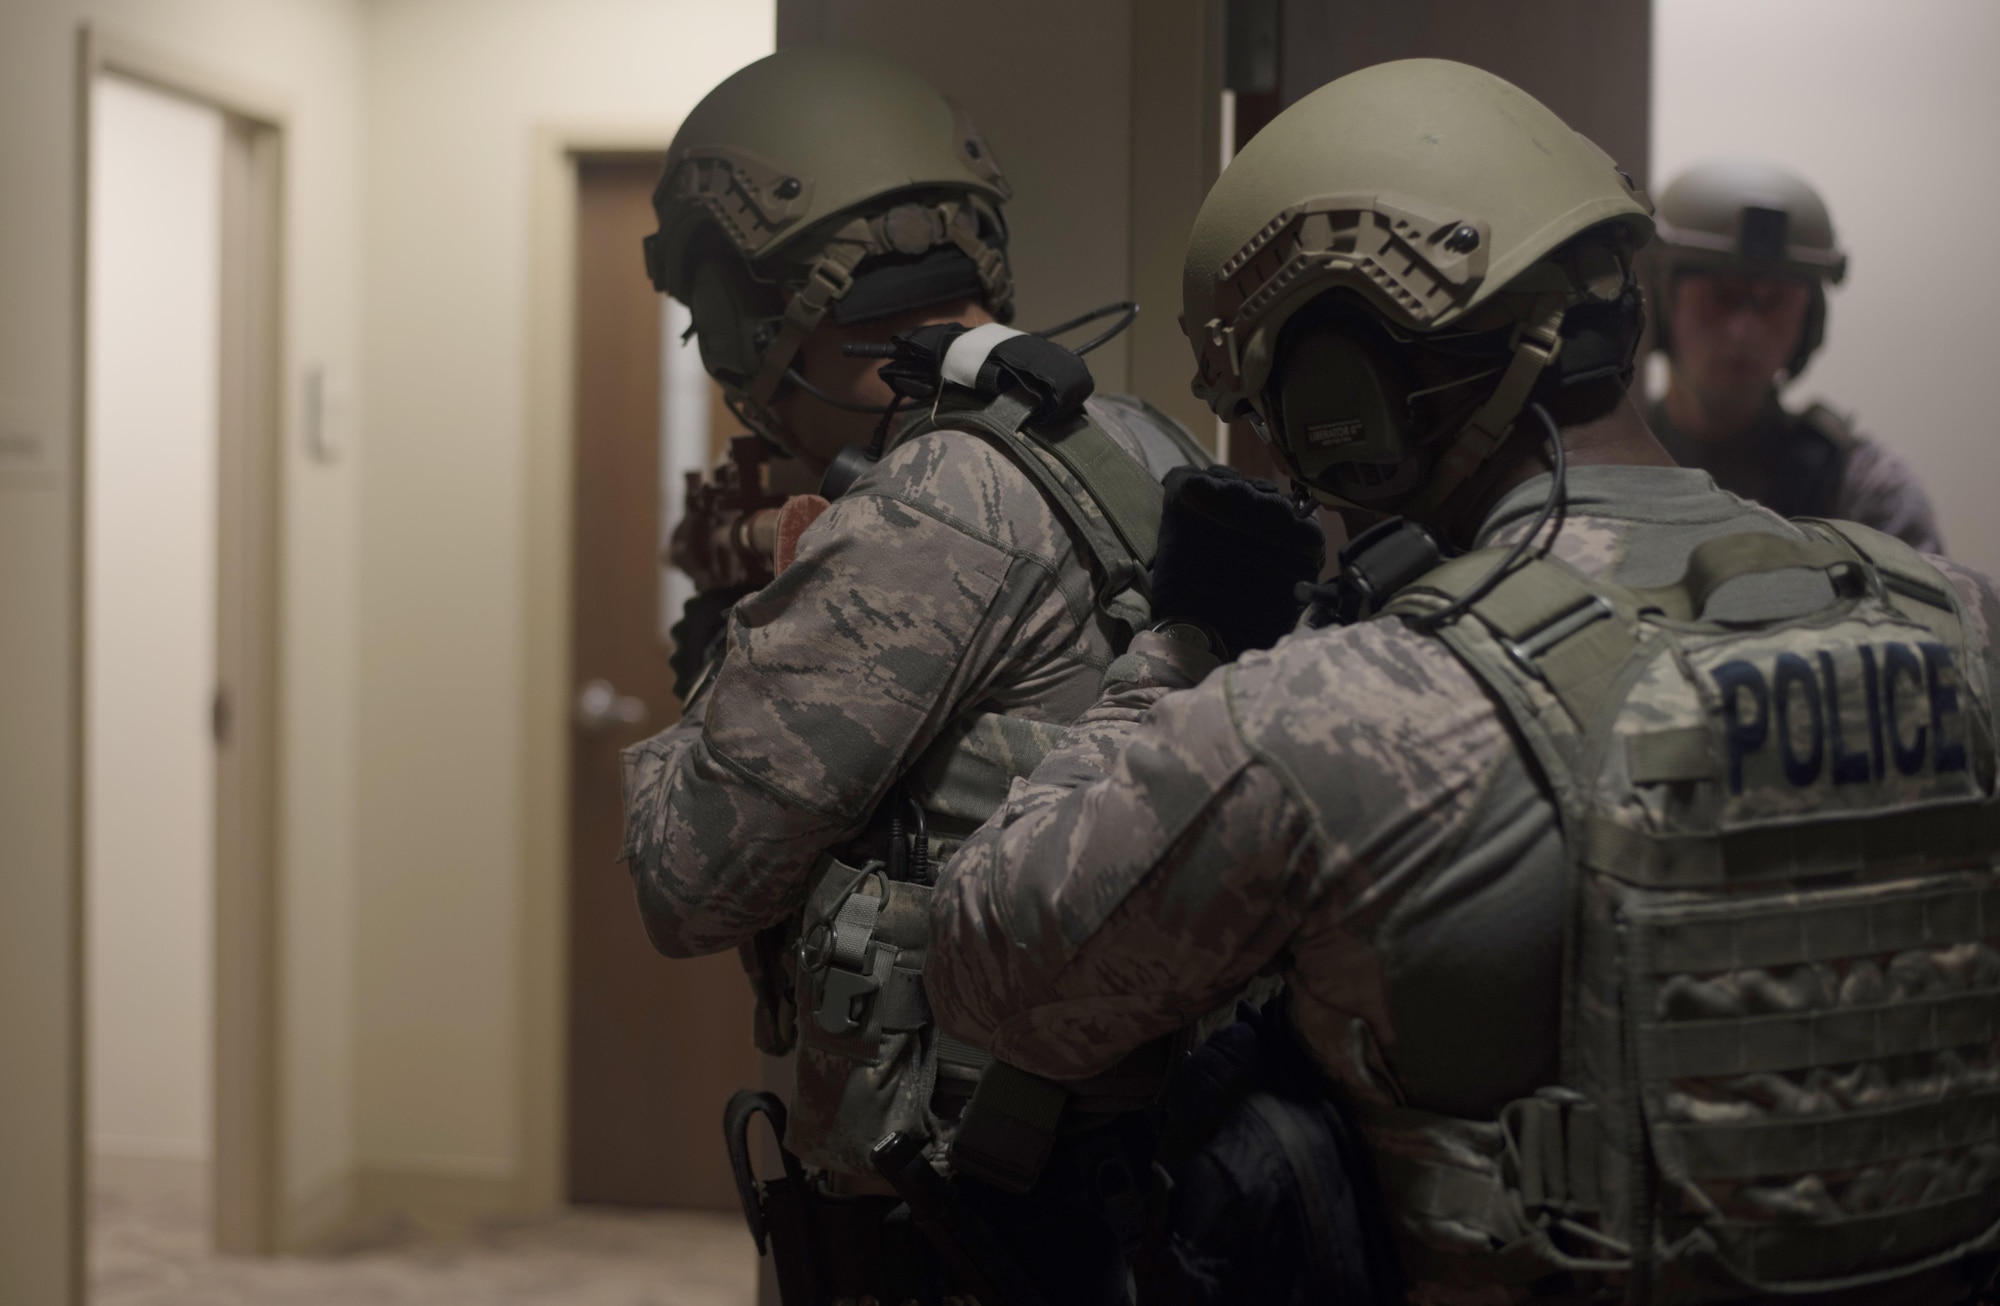 Members of the emergency services team assigned to the 6th Security Forces Squadron, group together to begin searching for casualties during an active shooter exercise at MacDill Air Force Base, Fla., April 17, 2017. With multiple teams searching different areas of the building, communication was important in order to quickly search the entire building. (U.S. Air Force photo by Airman 1st Class Adam R. Shanks)